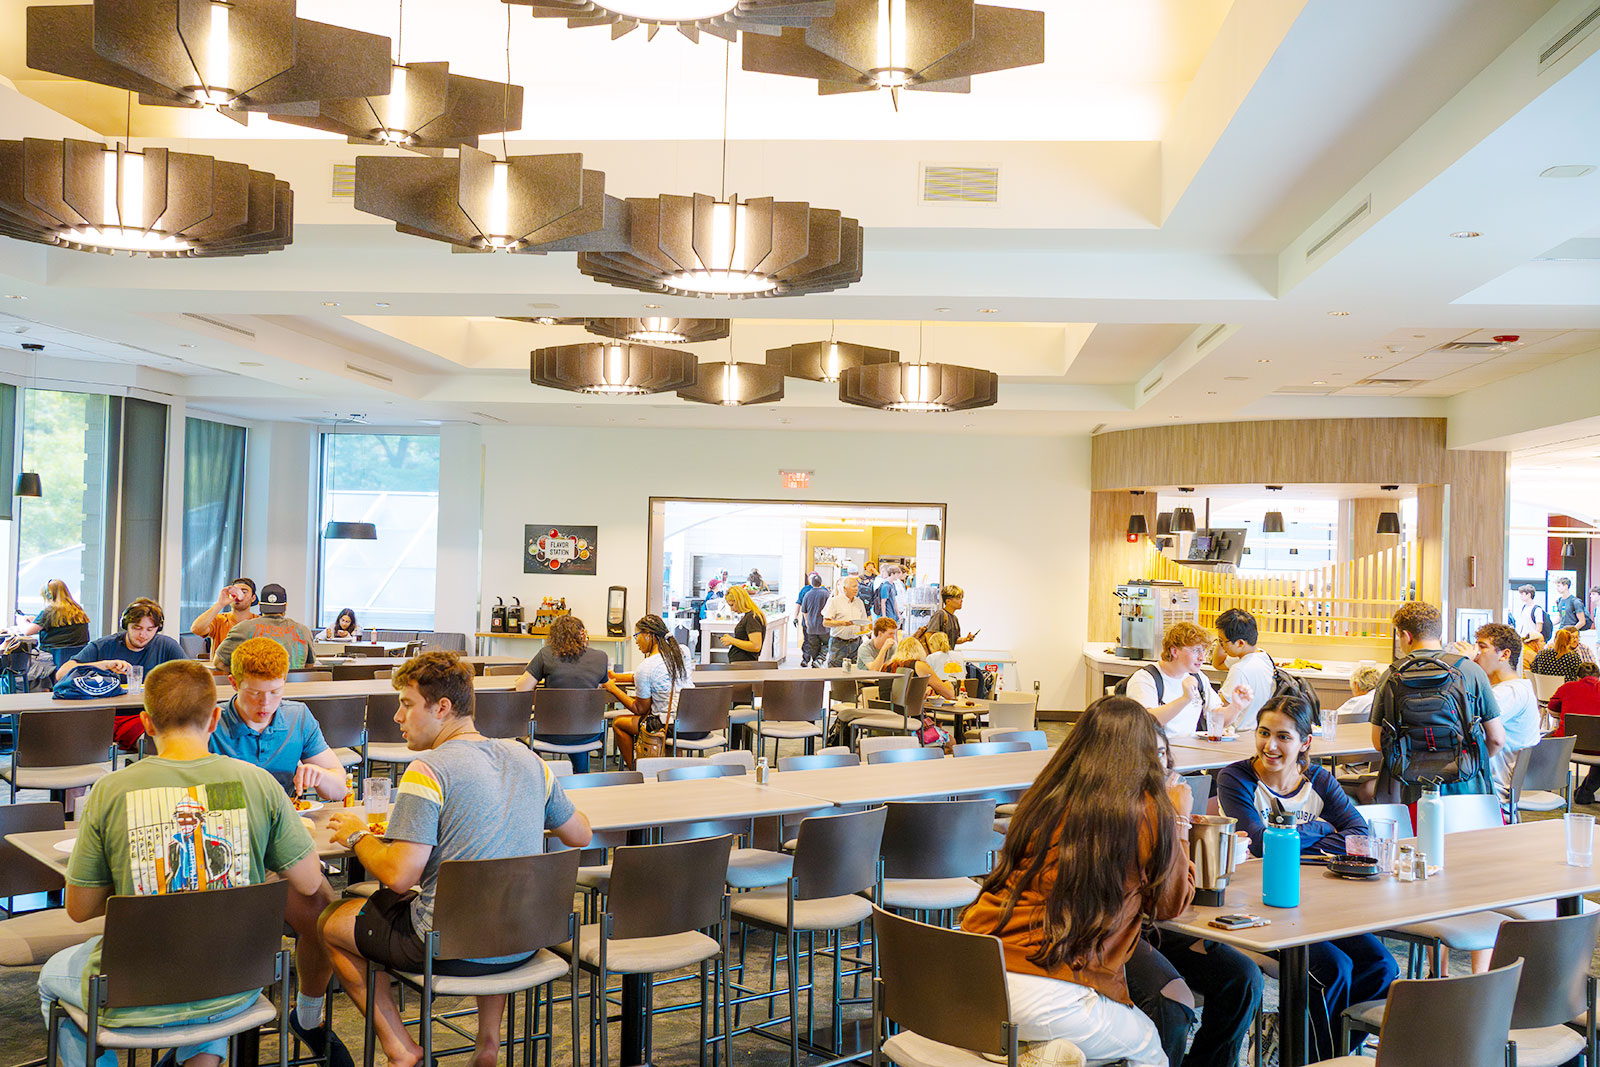 A view of the Reamer Campus Center third floor dining area.